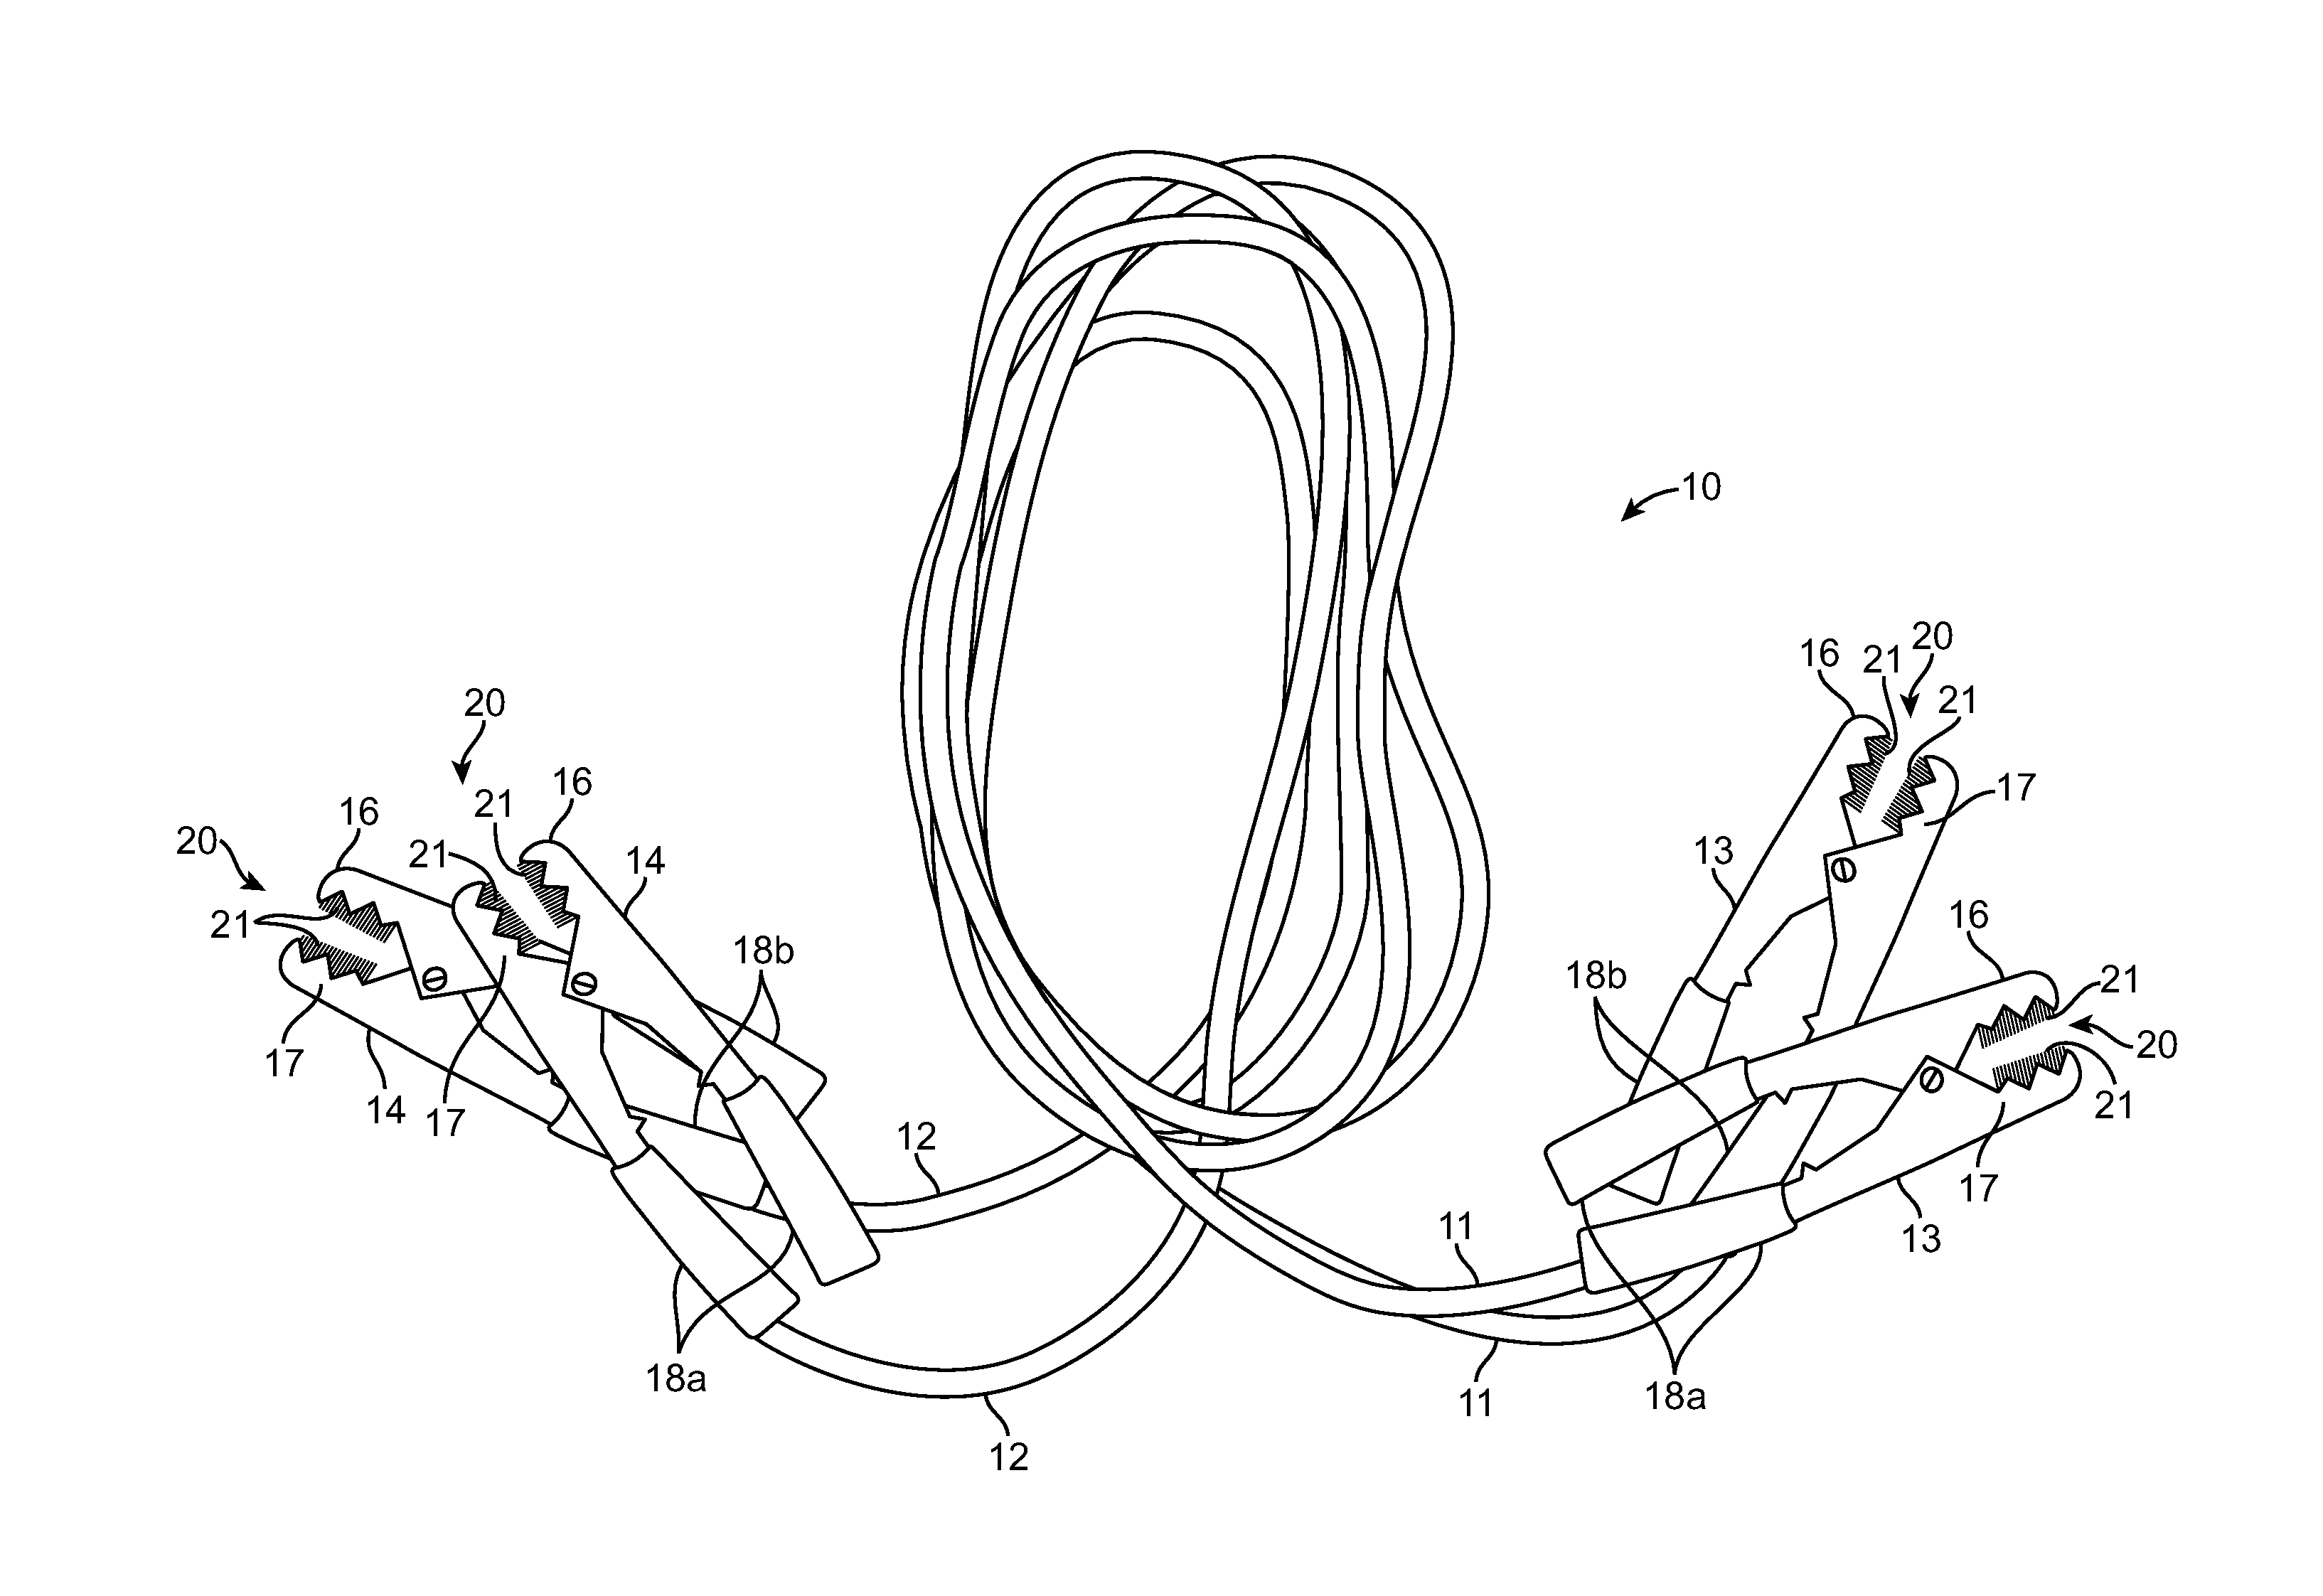 Battery jumper cables with integral wire brush